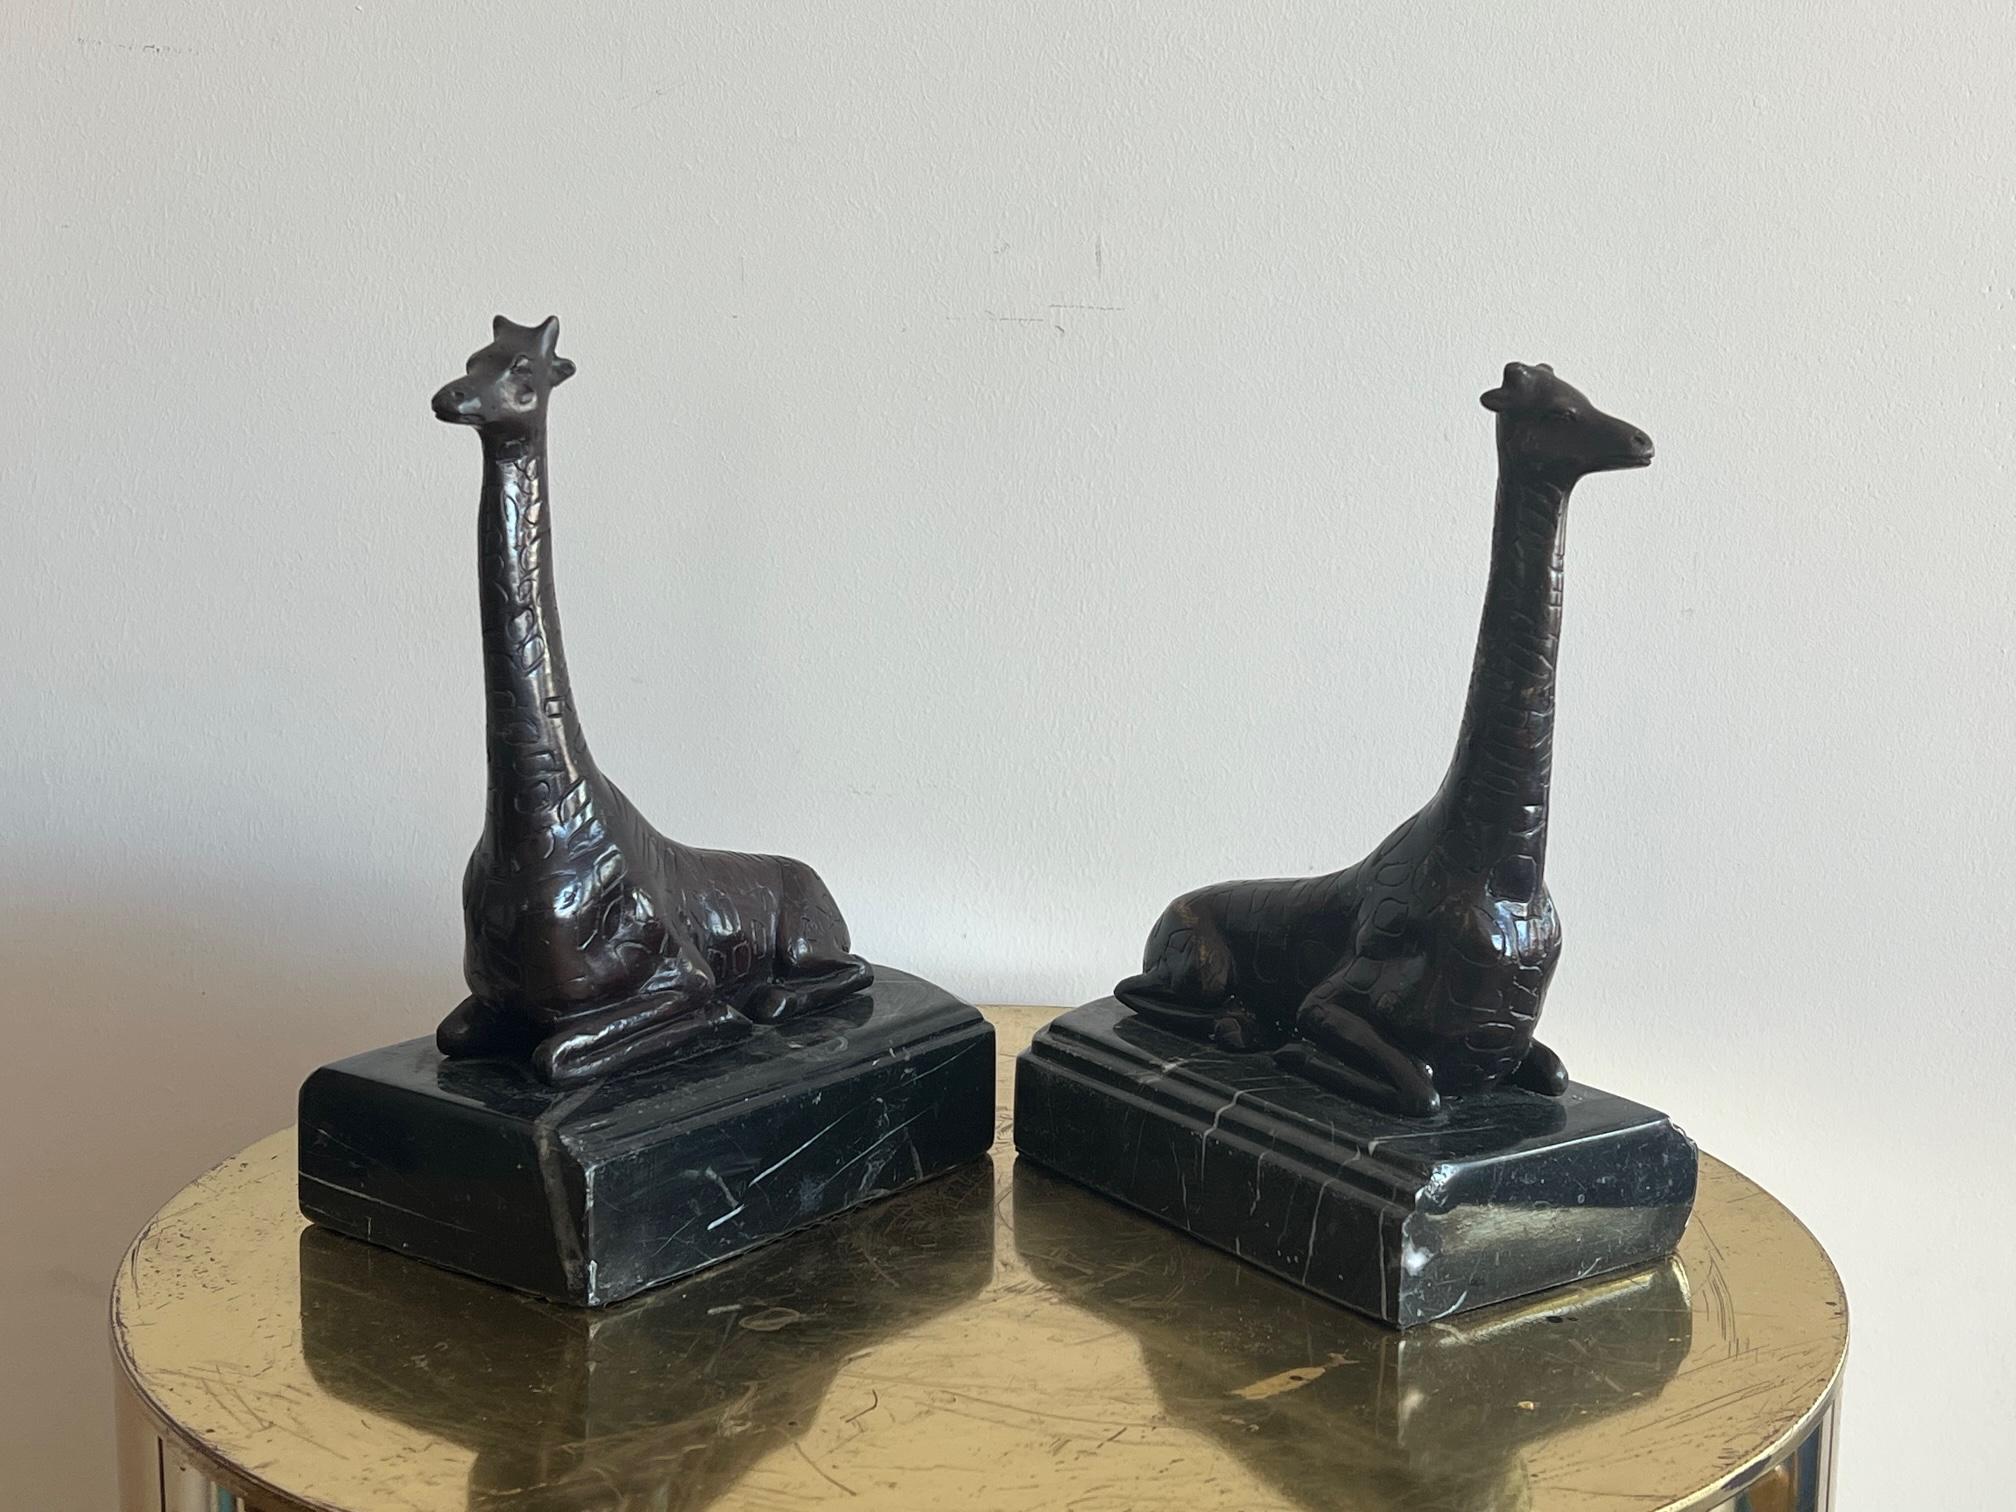 A pair of unusual, handmade bronze giraffe bookends on marble bases made by Maitland Smith.